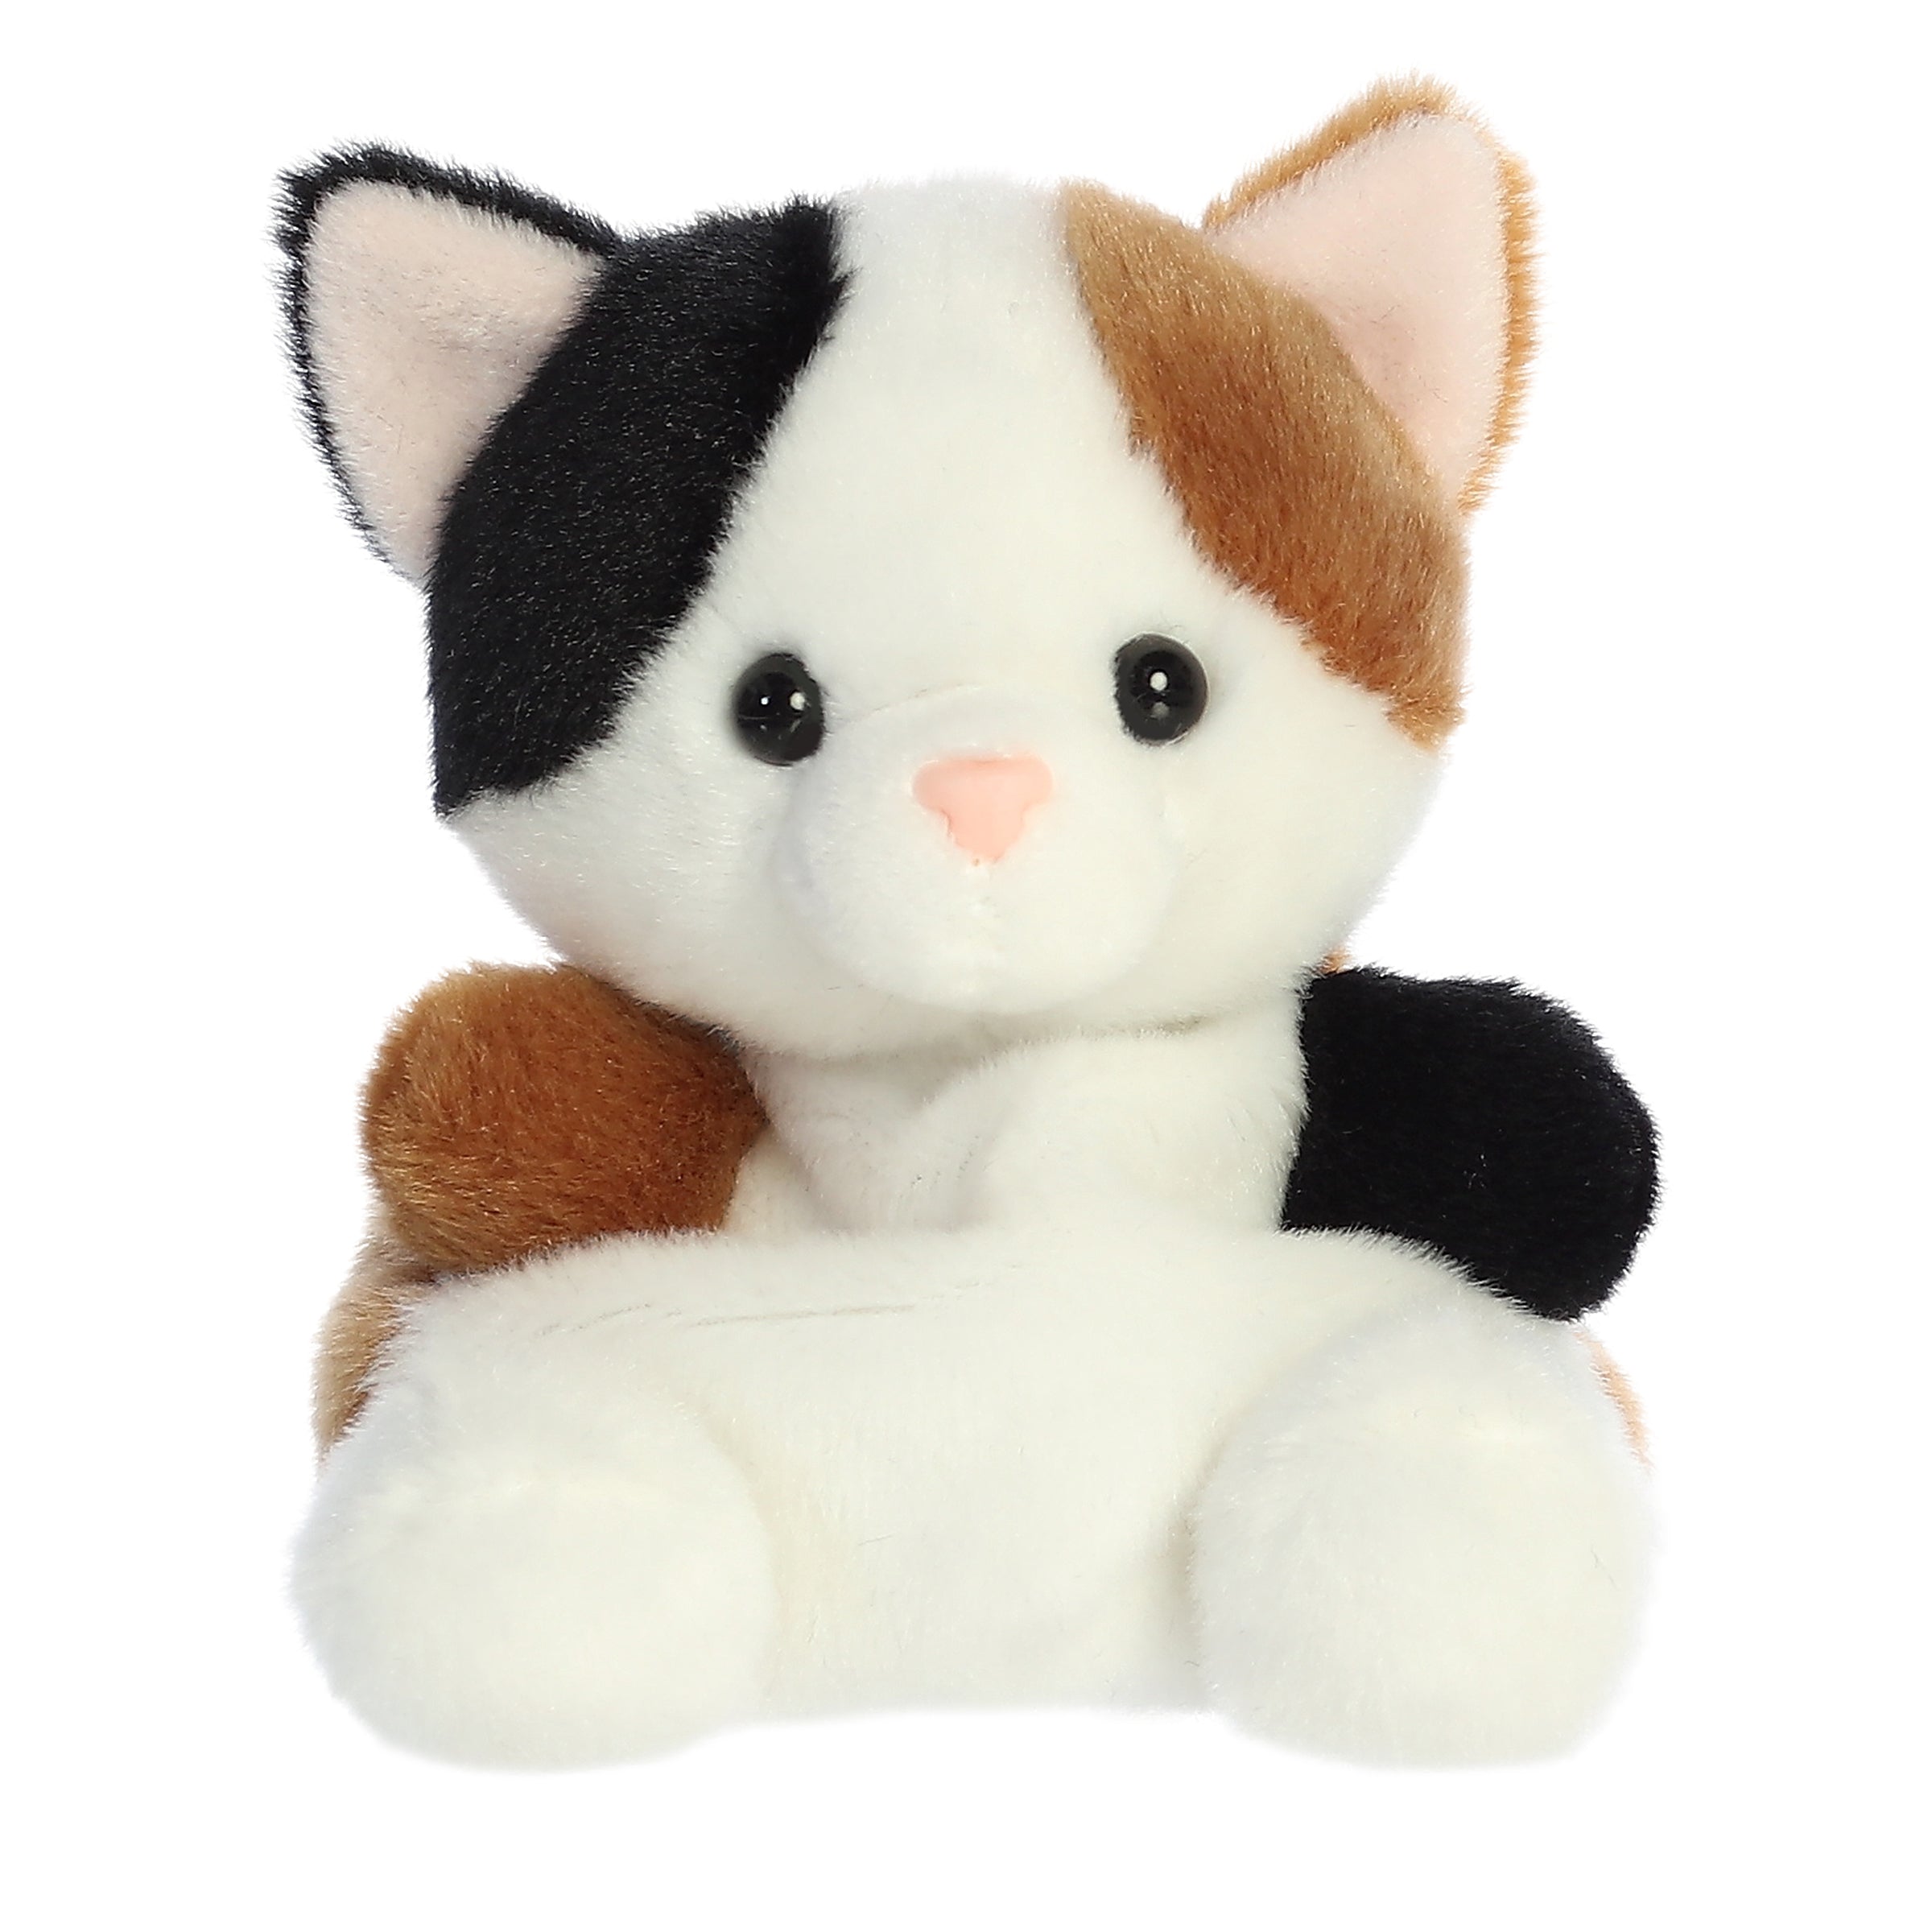 Peebs Calico Cat plush toy from Palm Pals, featuring white, black, and caramel fur, embodies tranquility.